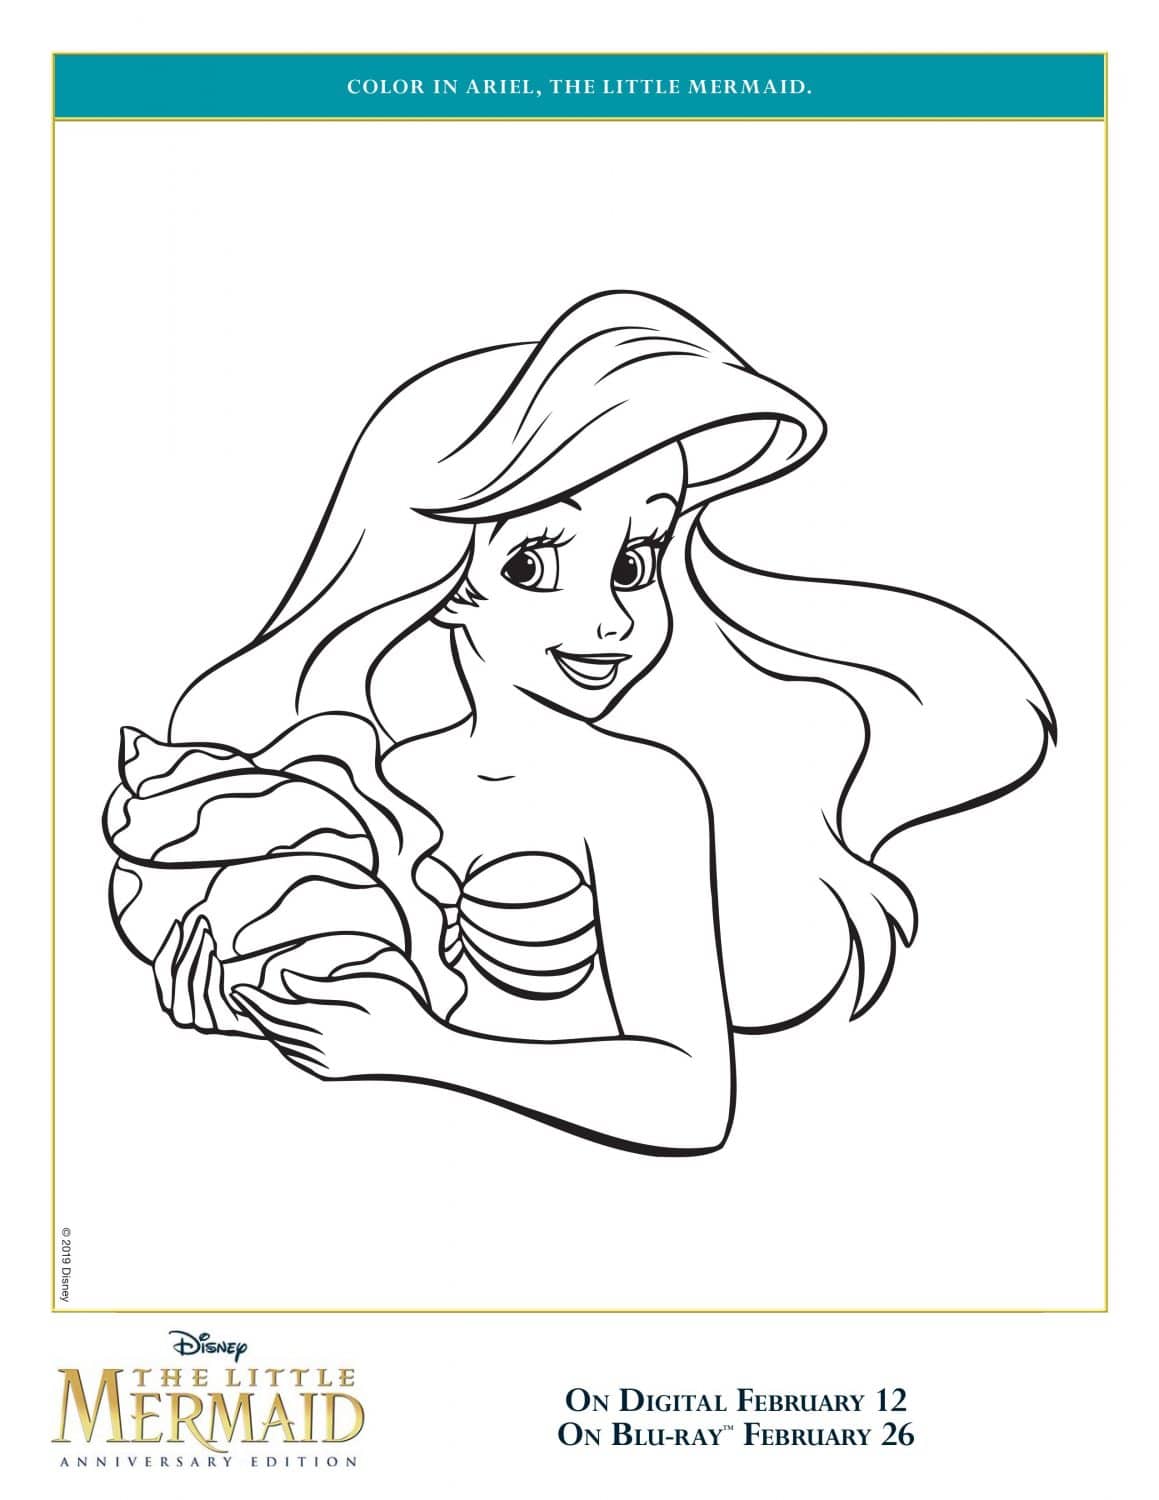 The Little Mermaid Coloring Pages and Activity Sheets   Crazy ...